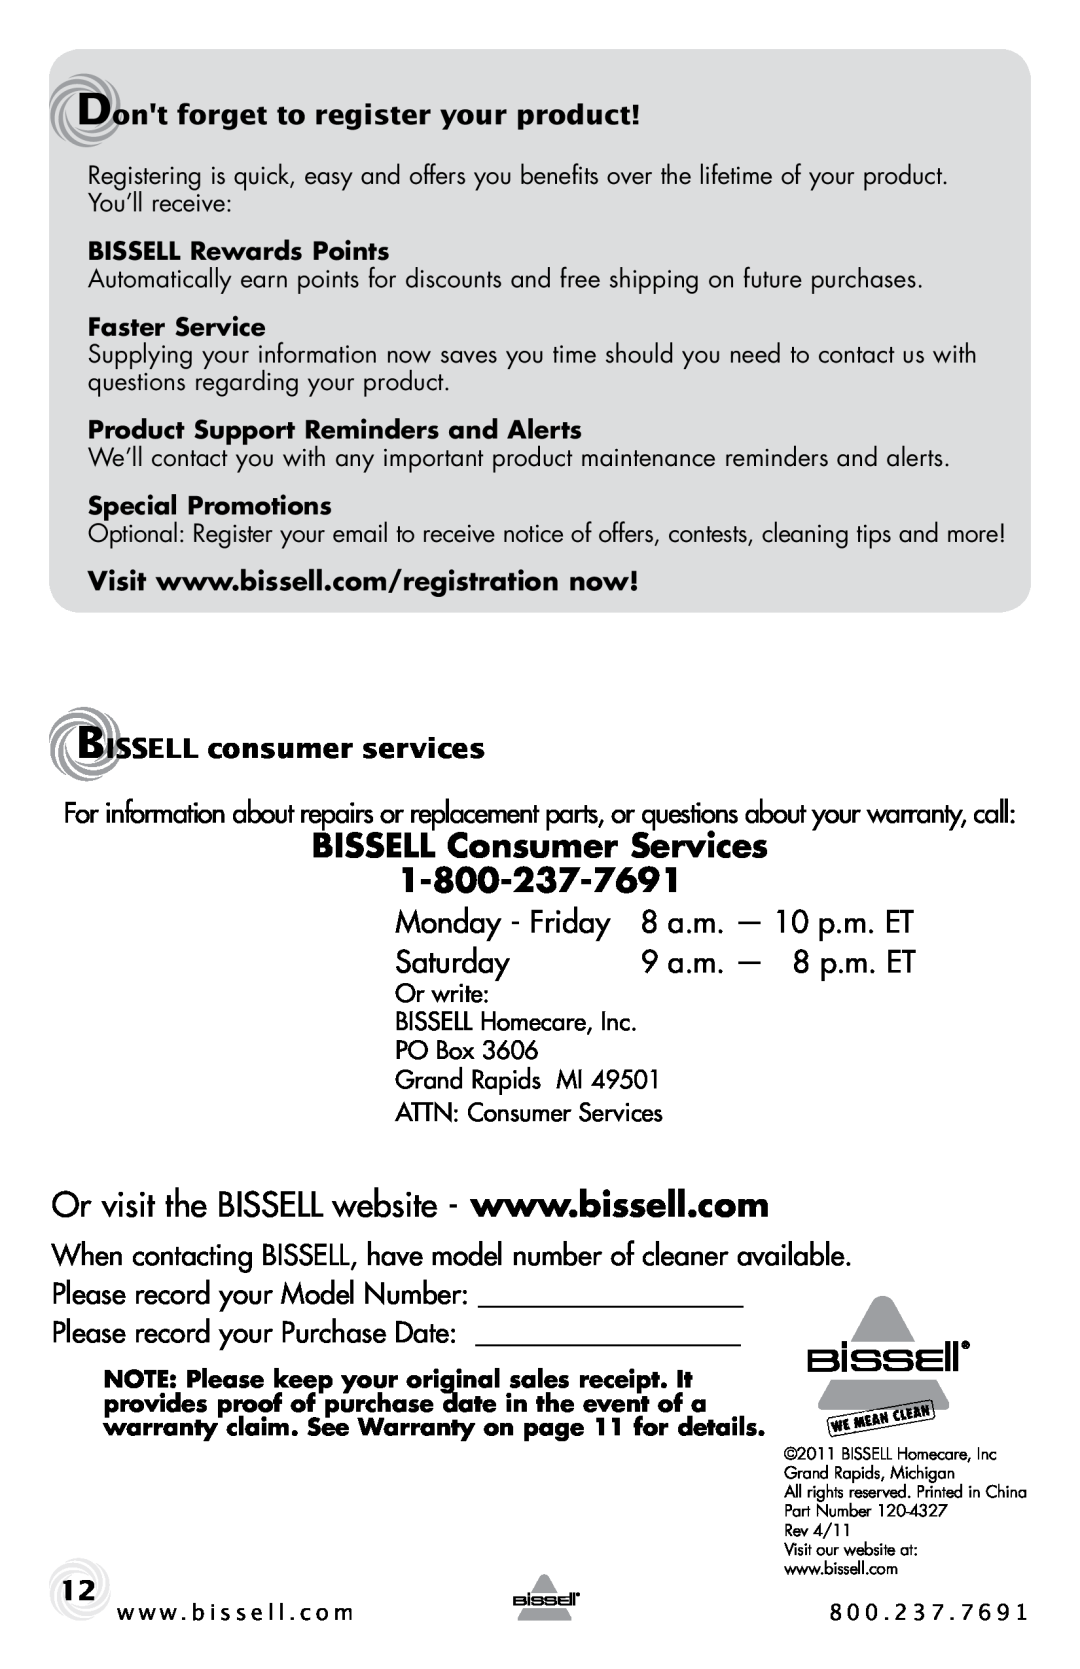 Bissell 50Y6 Series BISSELL Consumer Services, Dont forget to register your product, BISSELL consumer services, Saturday 